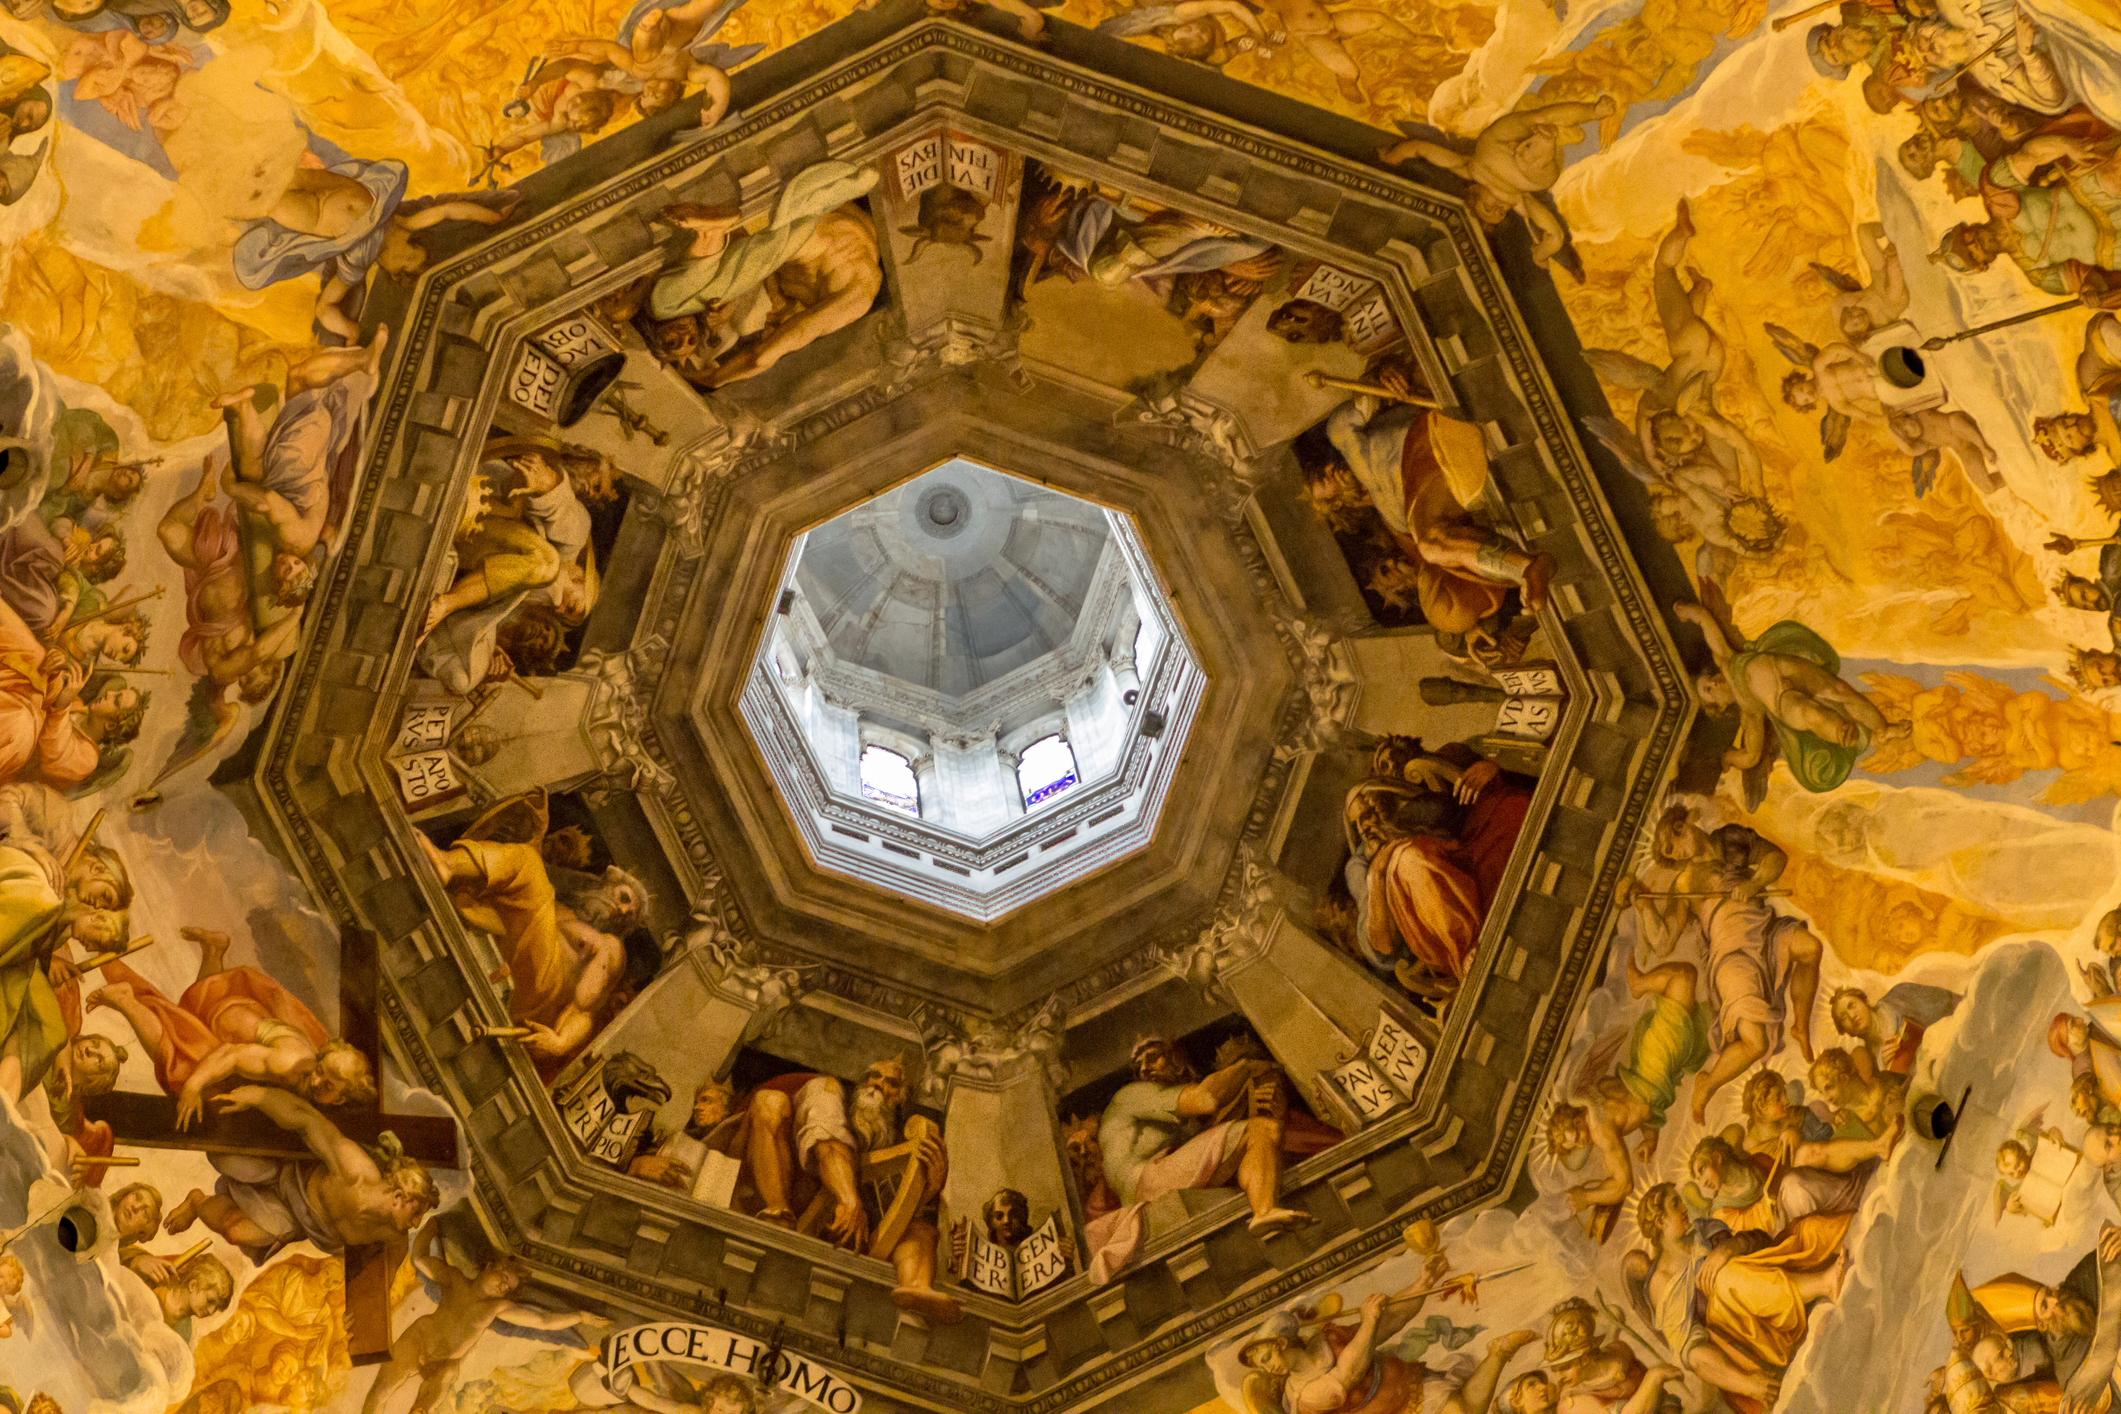 Judgment Day inside of the dome in the Florence Cathedral of Santa Maria del Fiore in Italy (Getty Images)